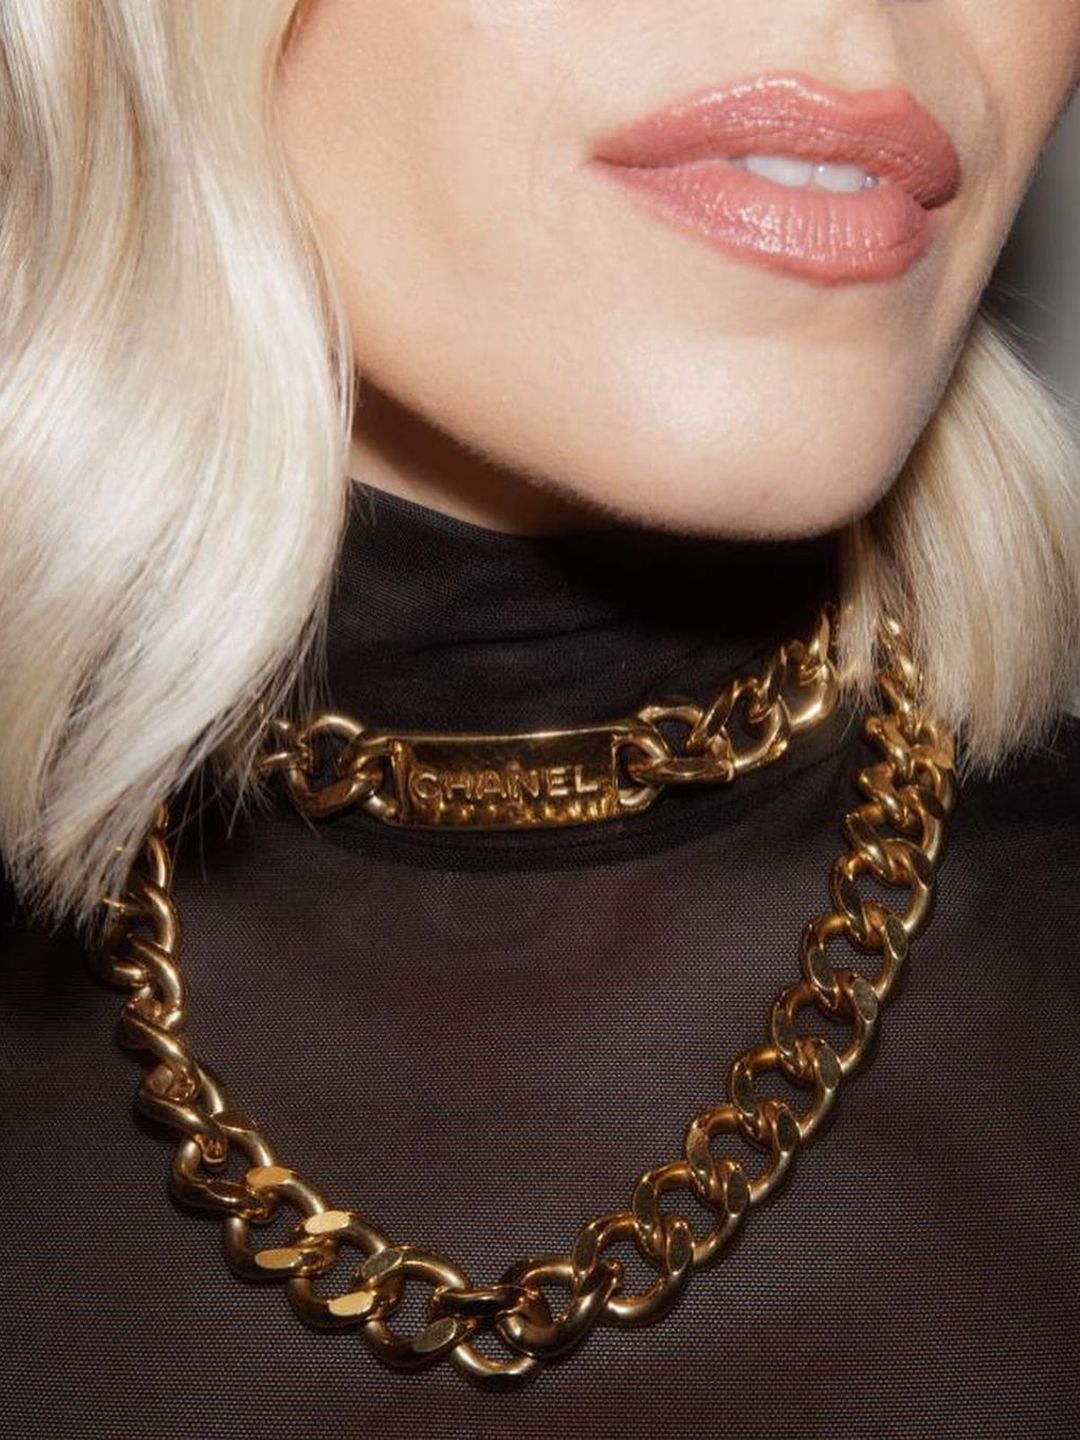 Becky shared a close up of the necklace on Instagram